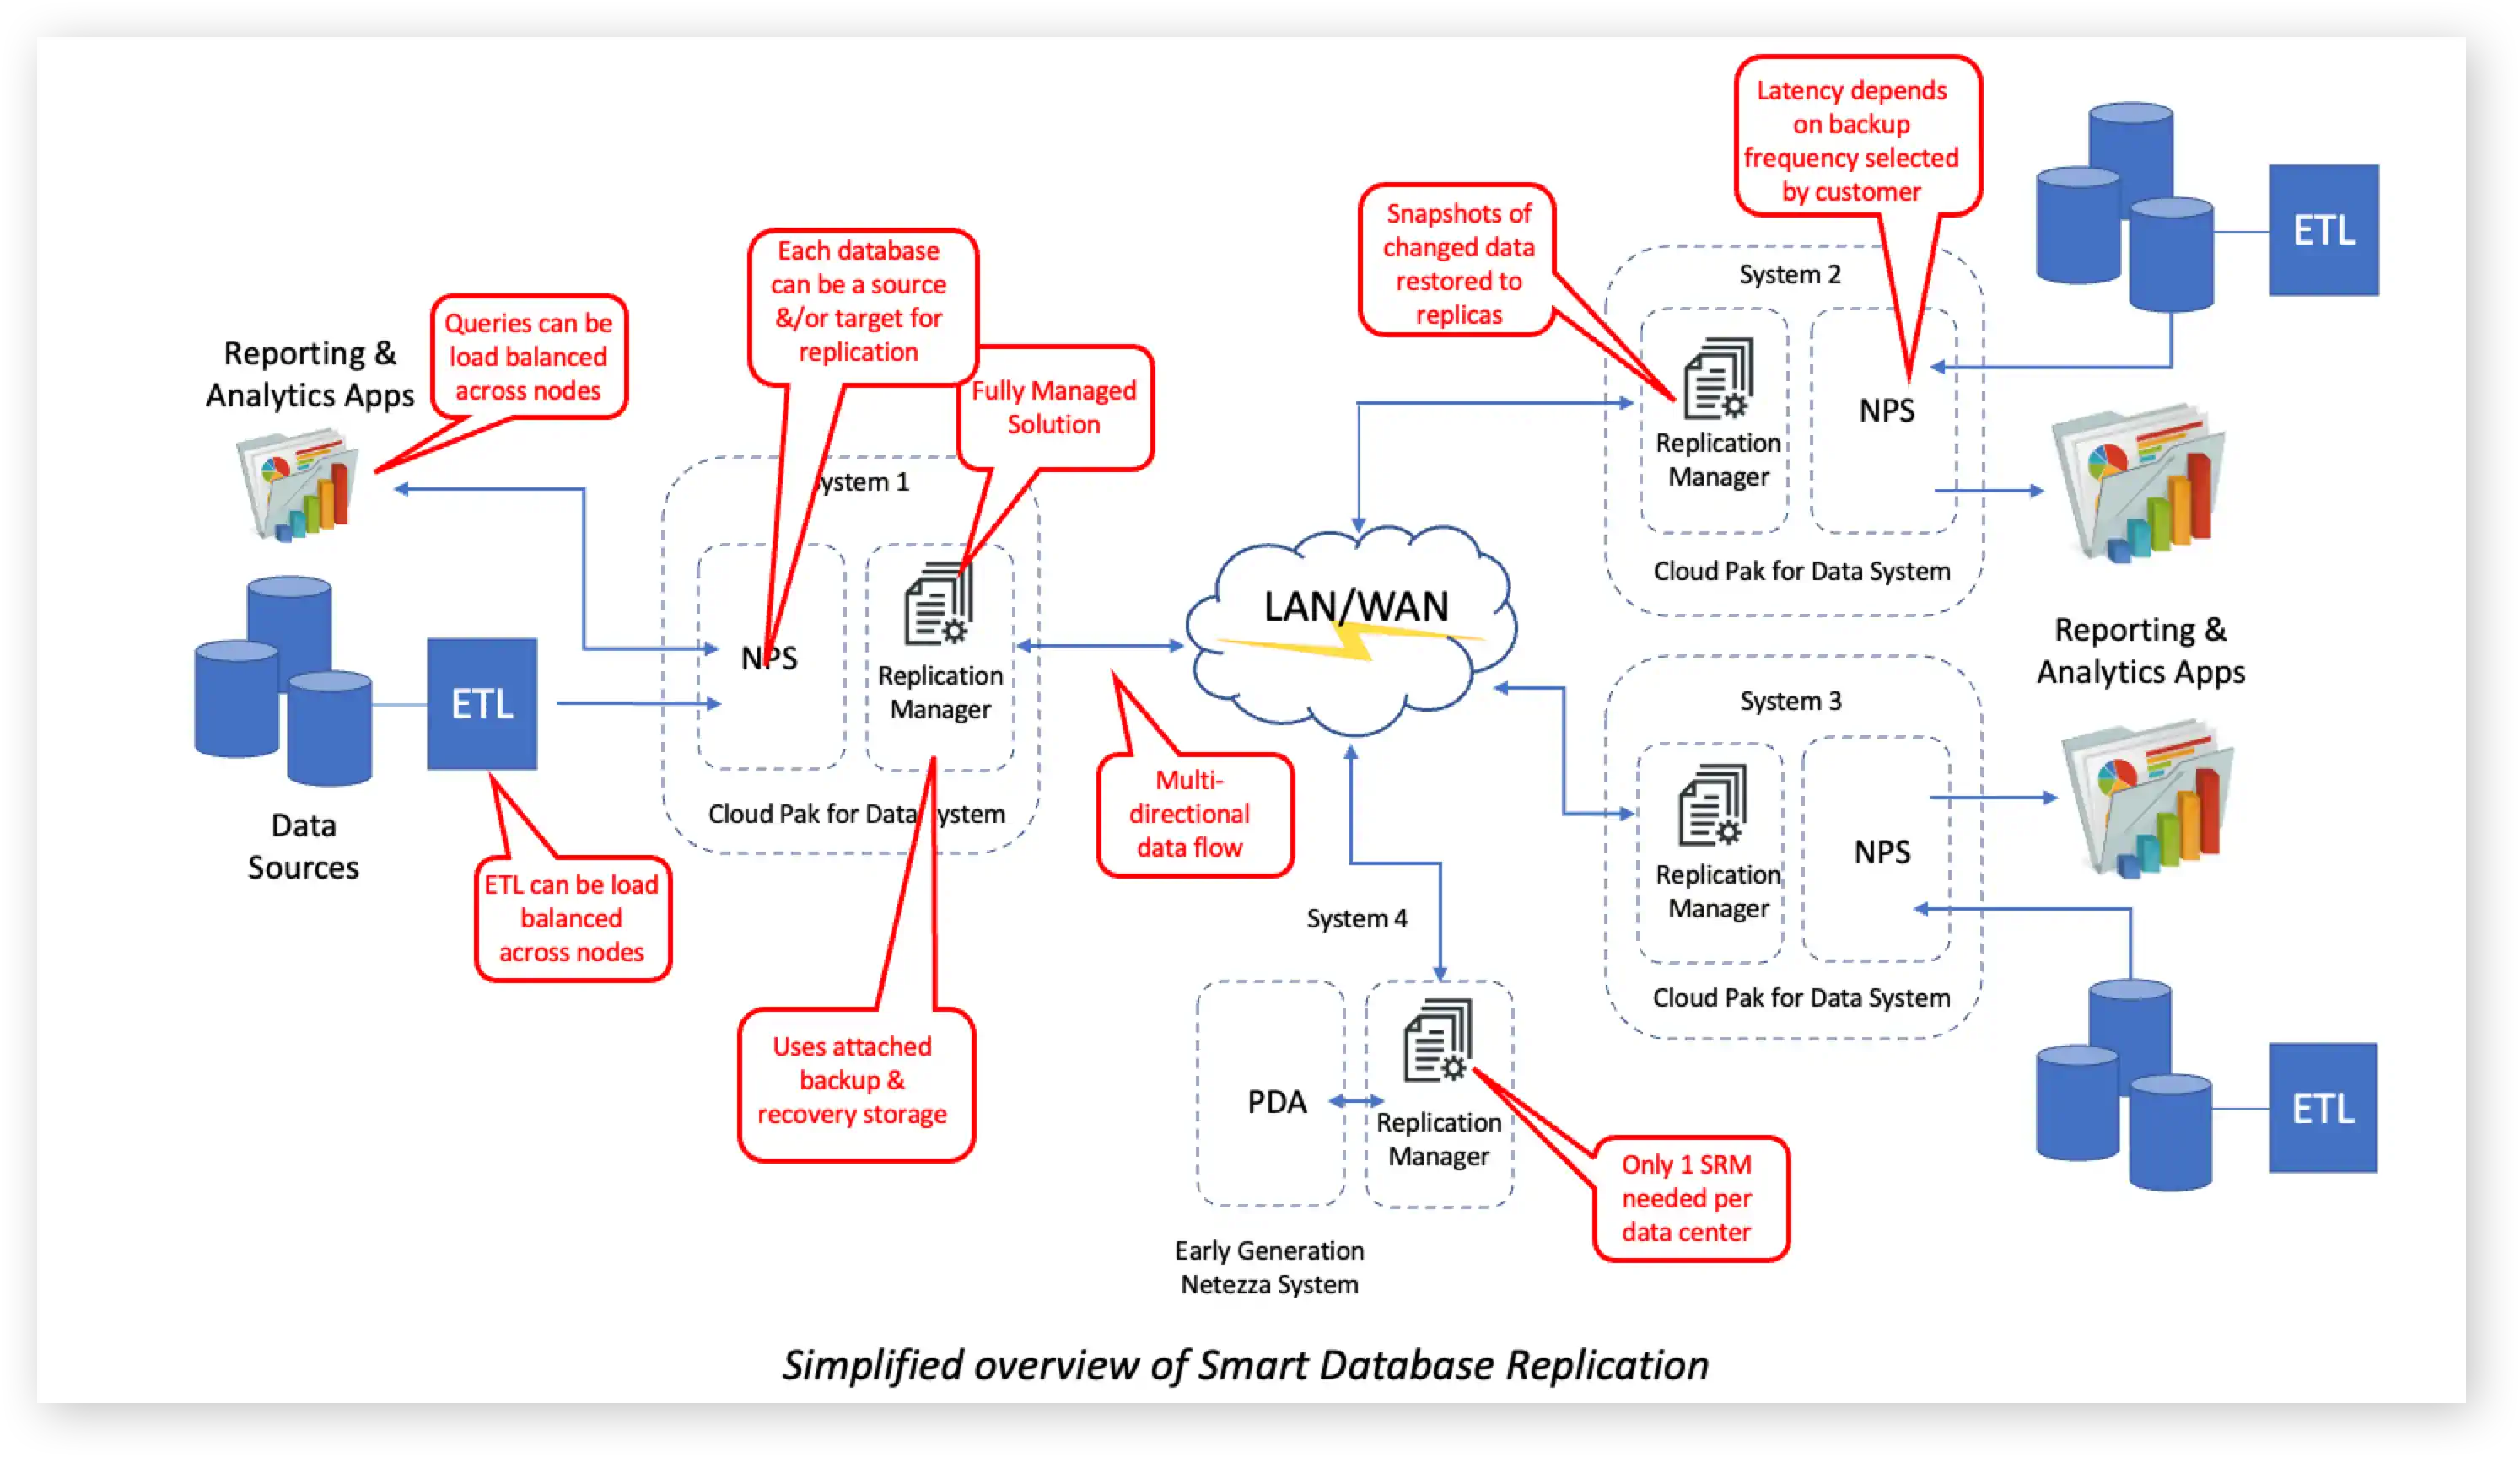 Simplified Overview of Smart Database Replication